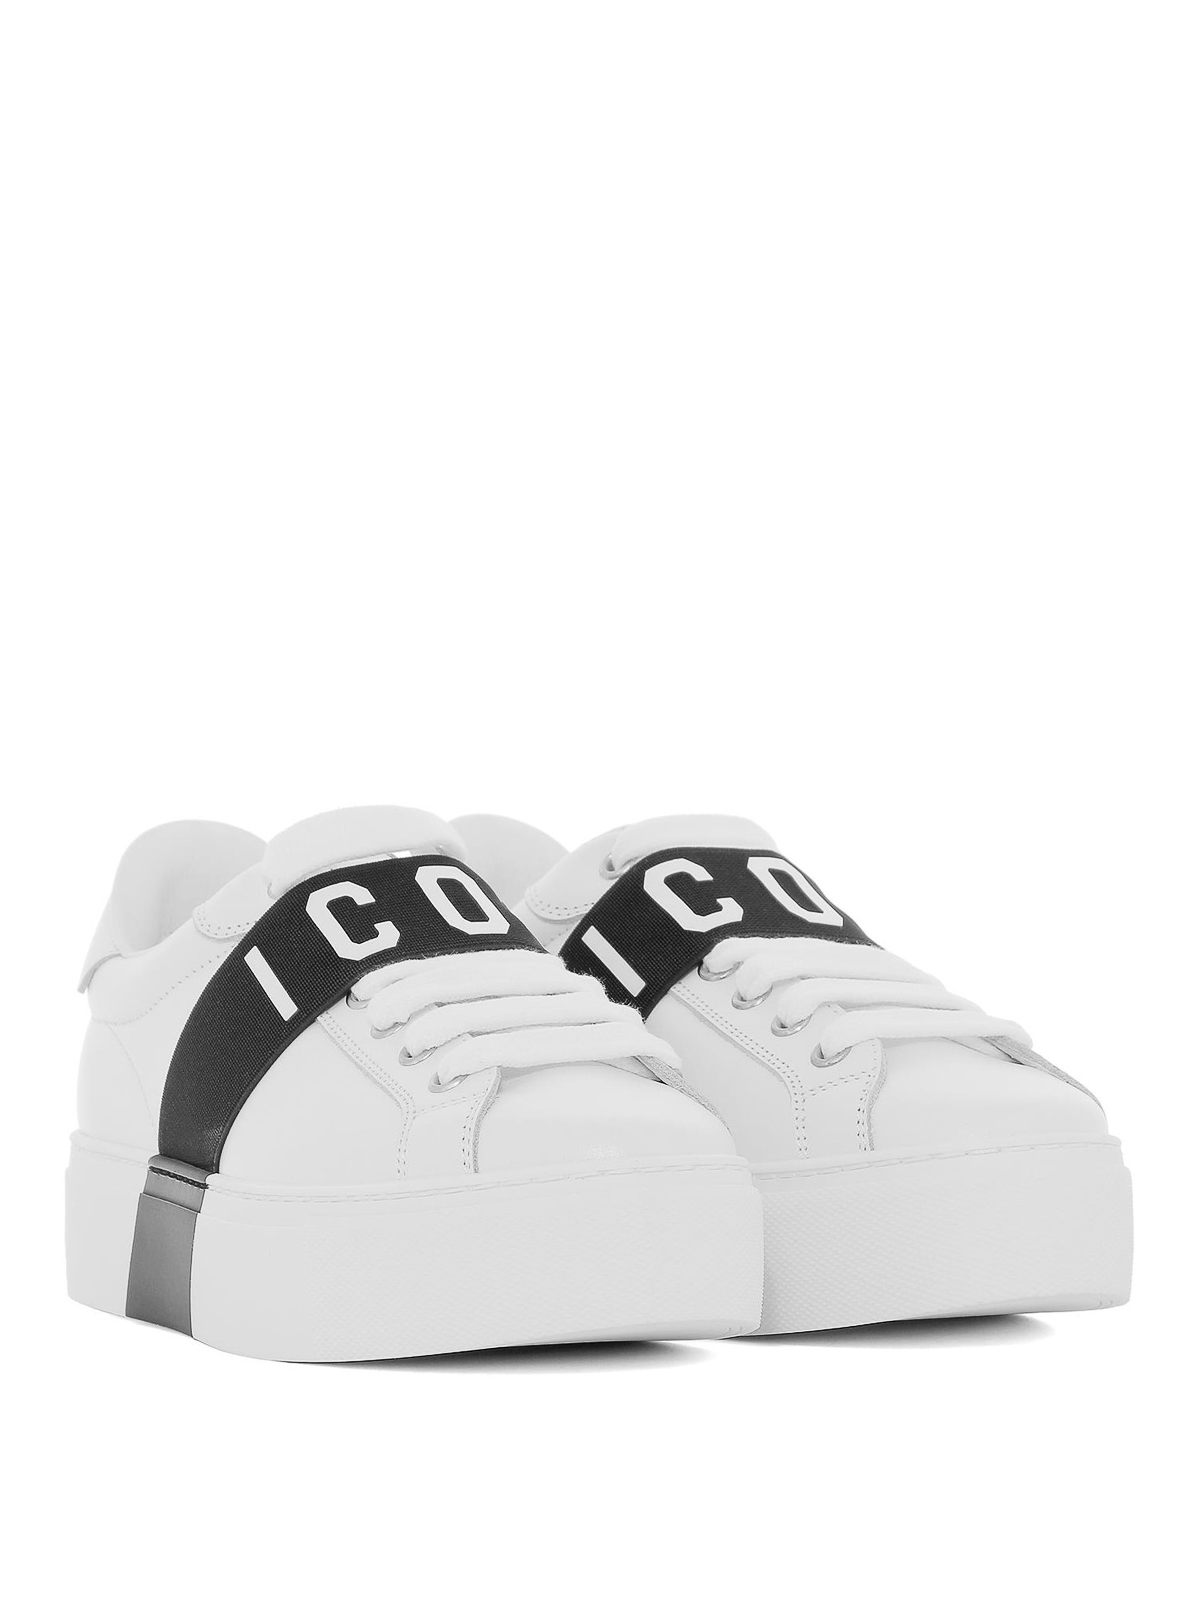 dsquared2 icon shoes